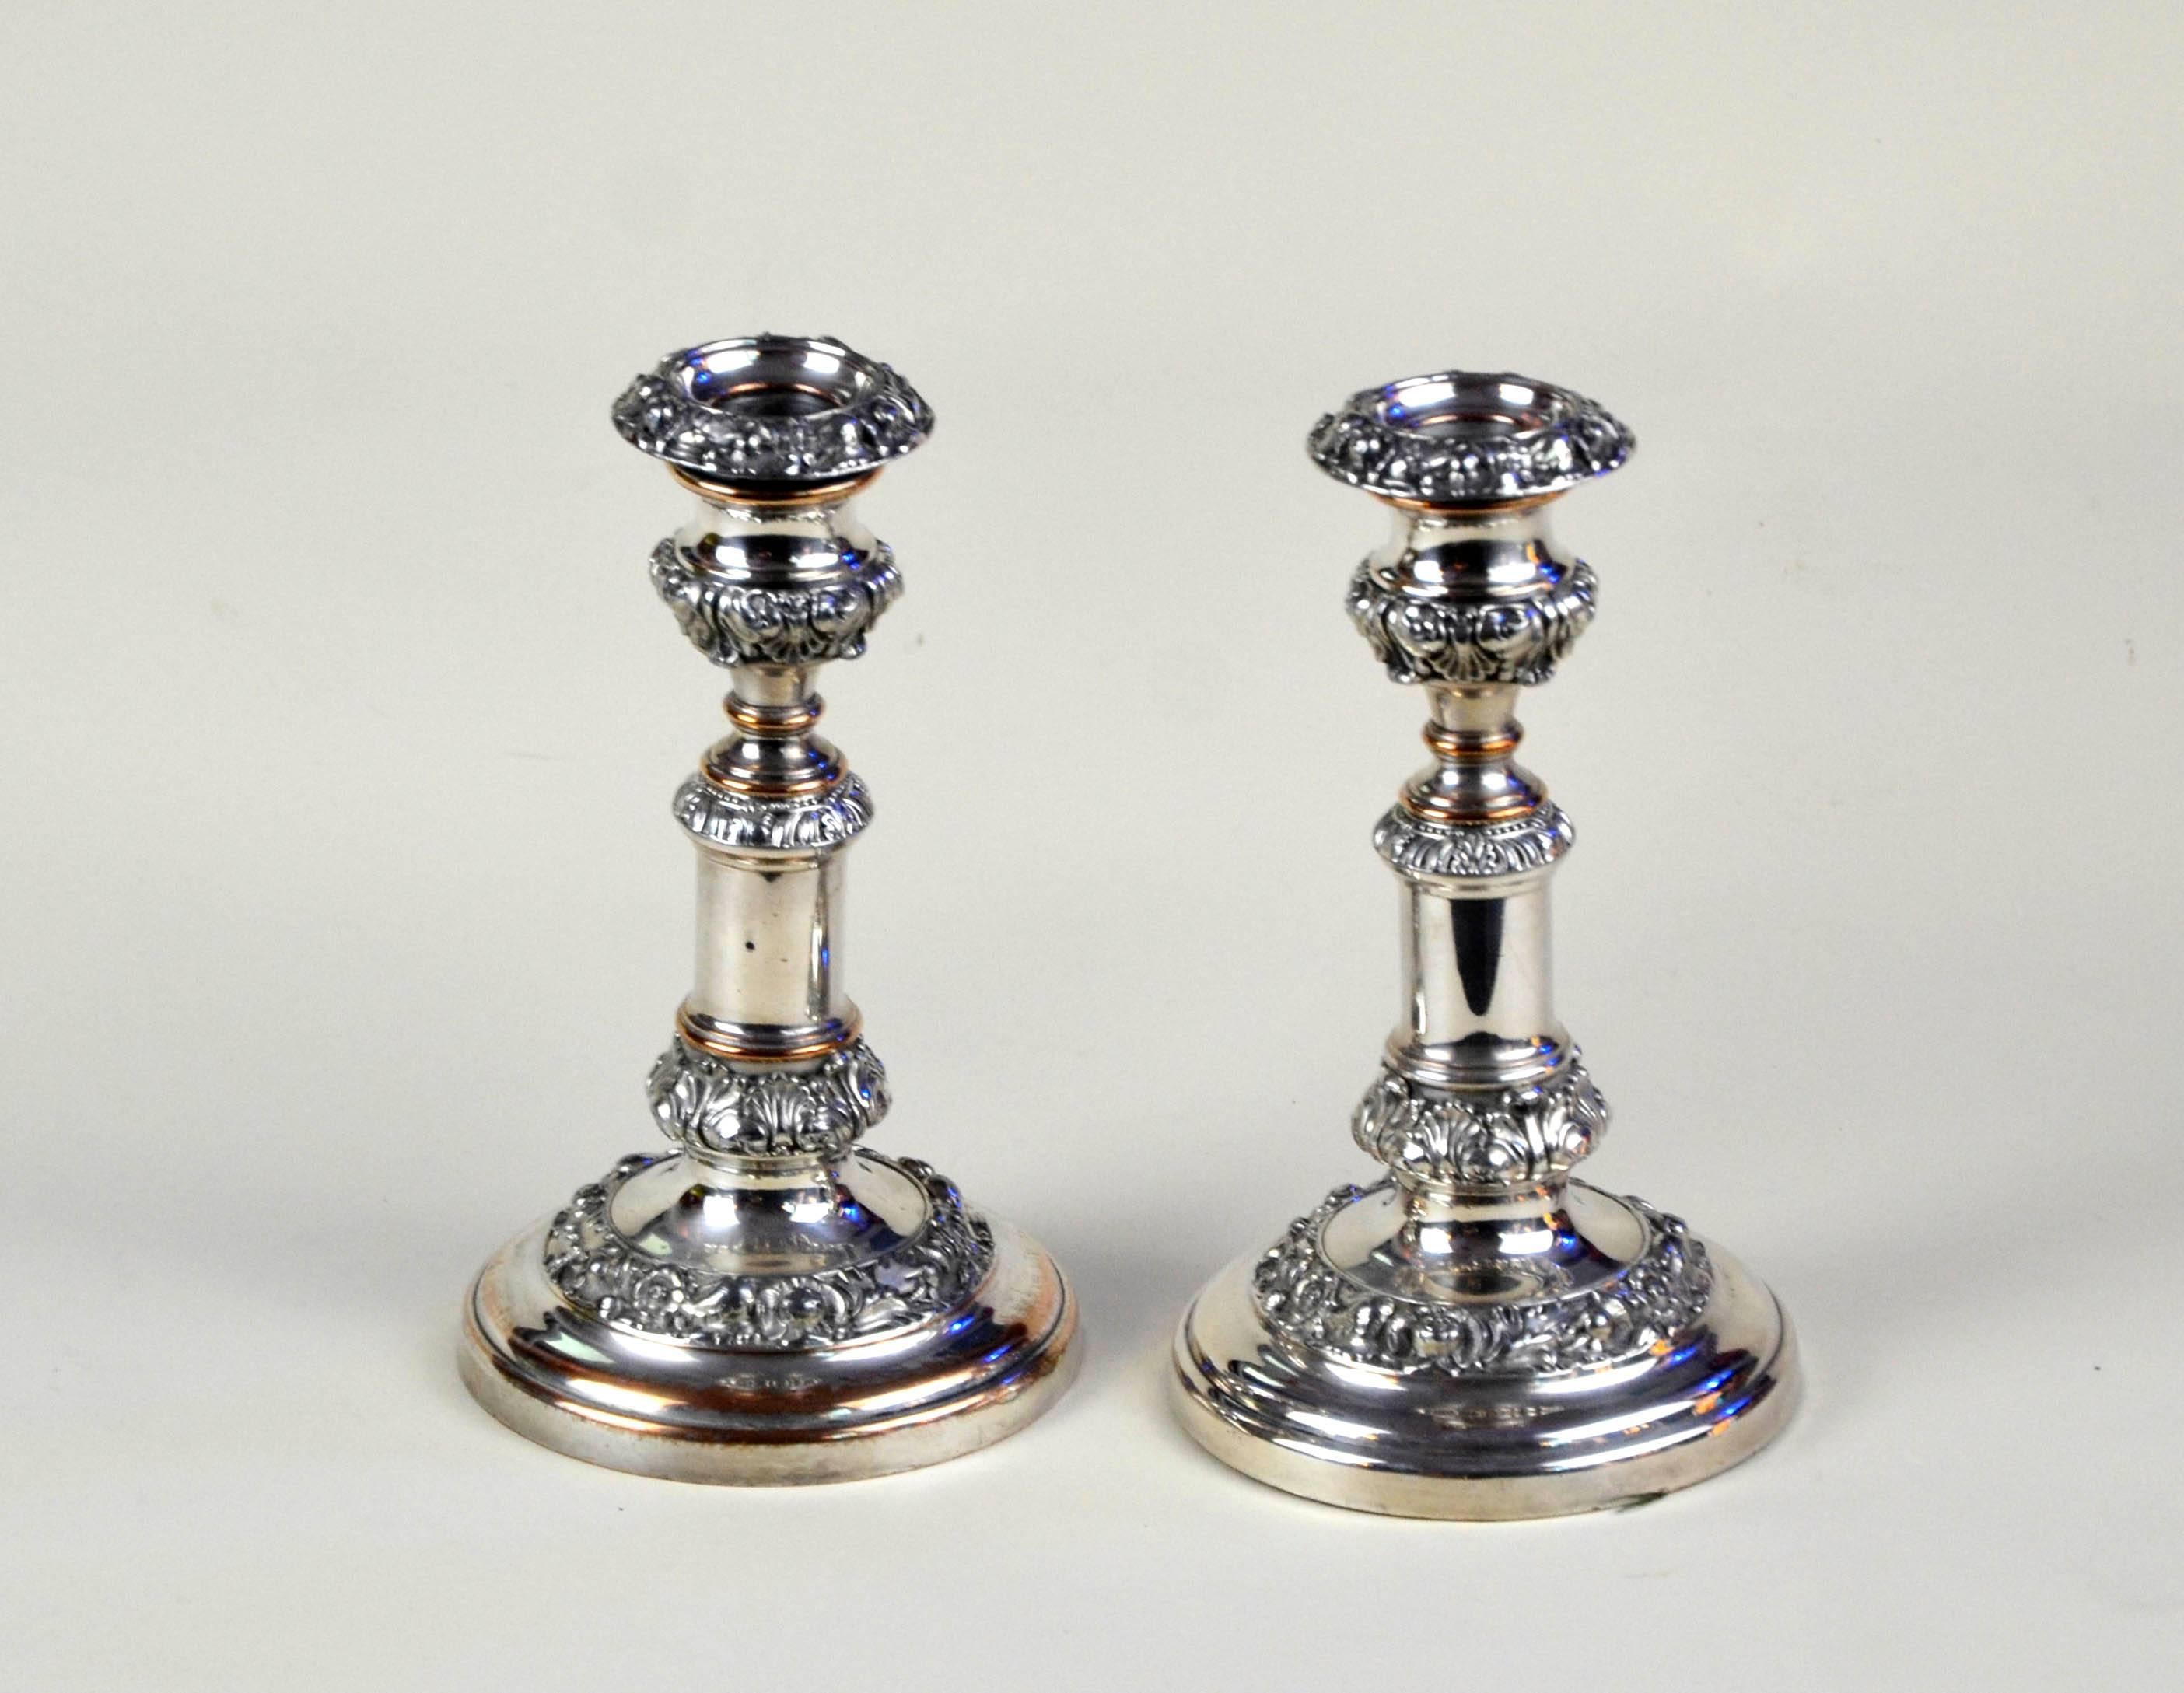 George IV 1820s Pair of English Georgian Old Sheffield Plate Telescopic Candlesticks For Sale